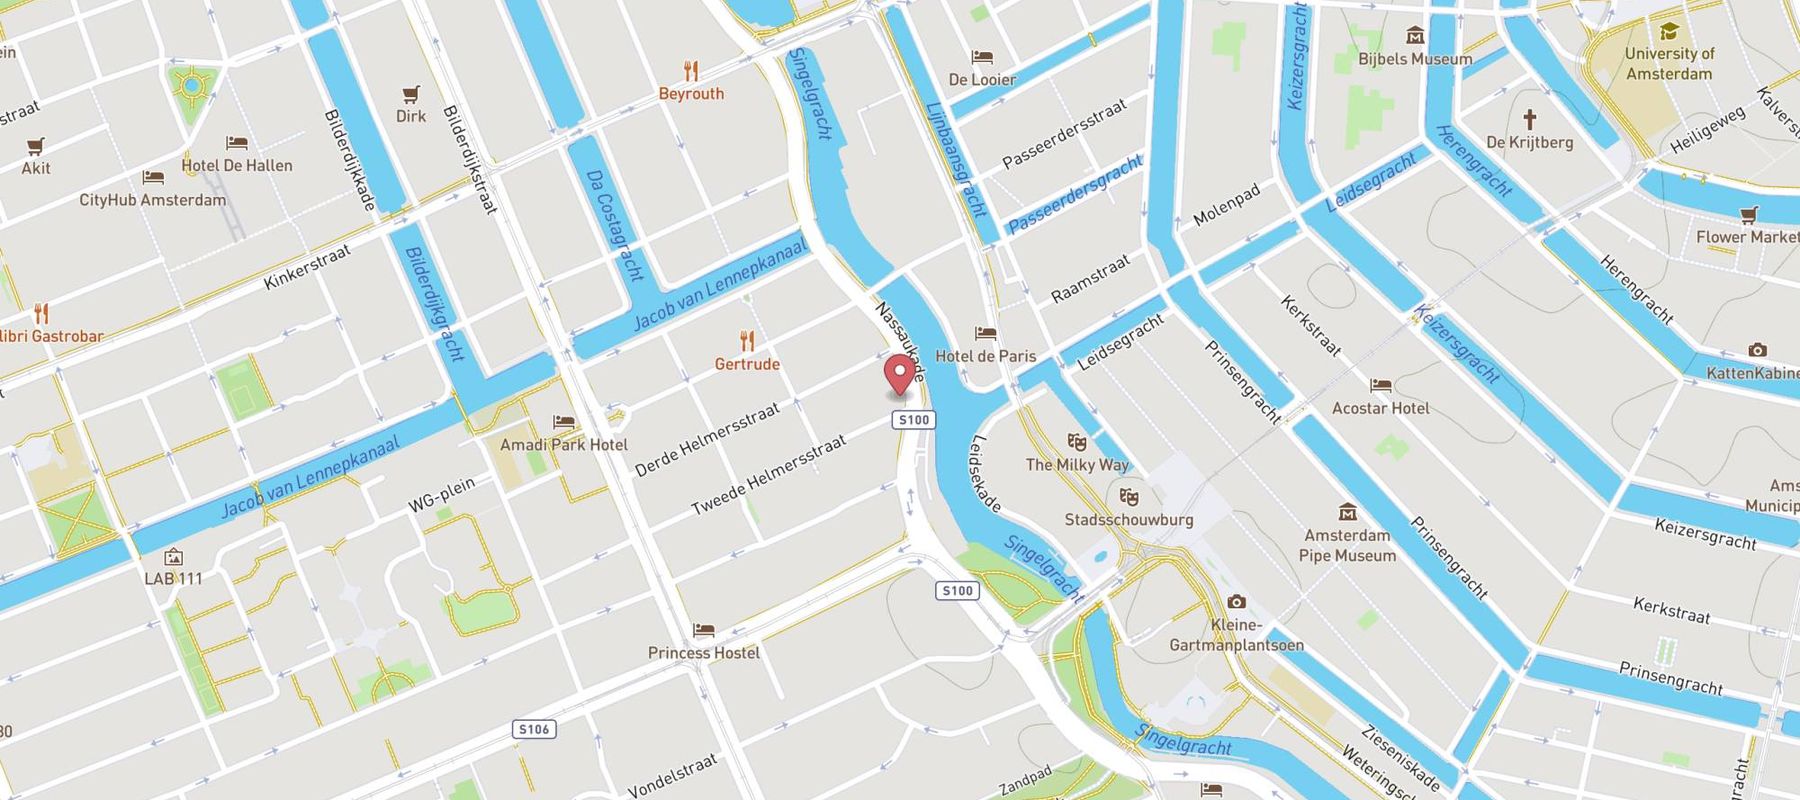 No. 377 House - Boutique Hotel Amsterdam map